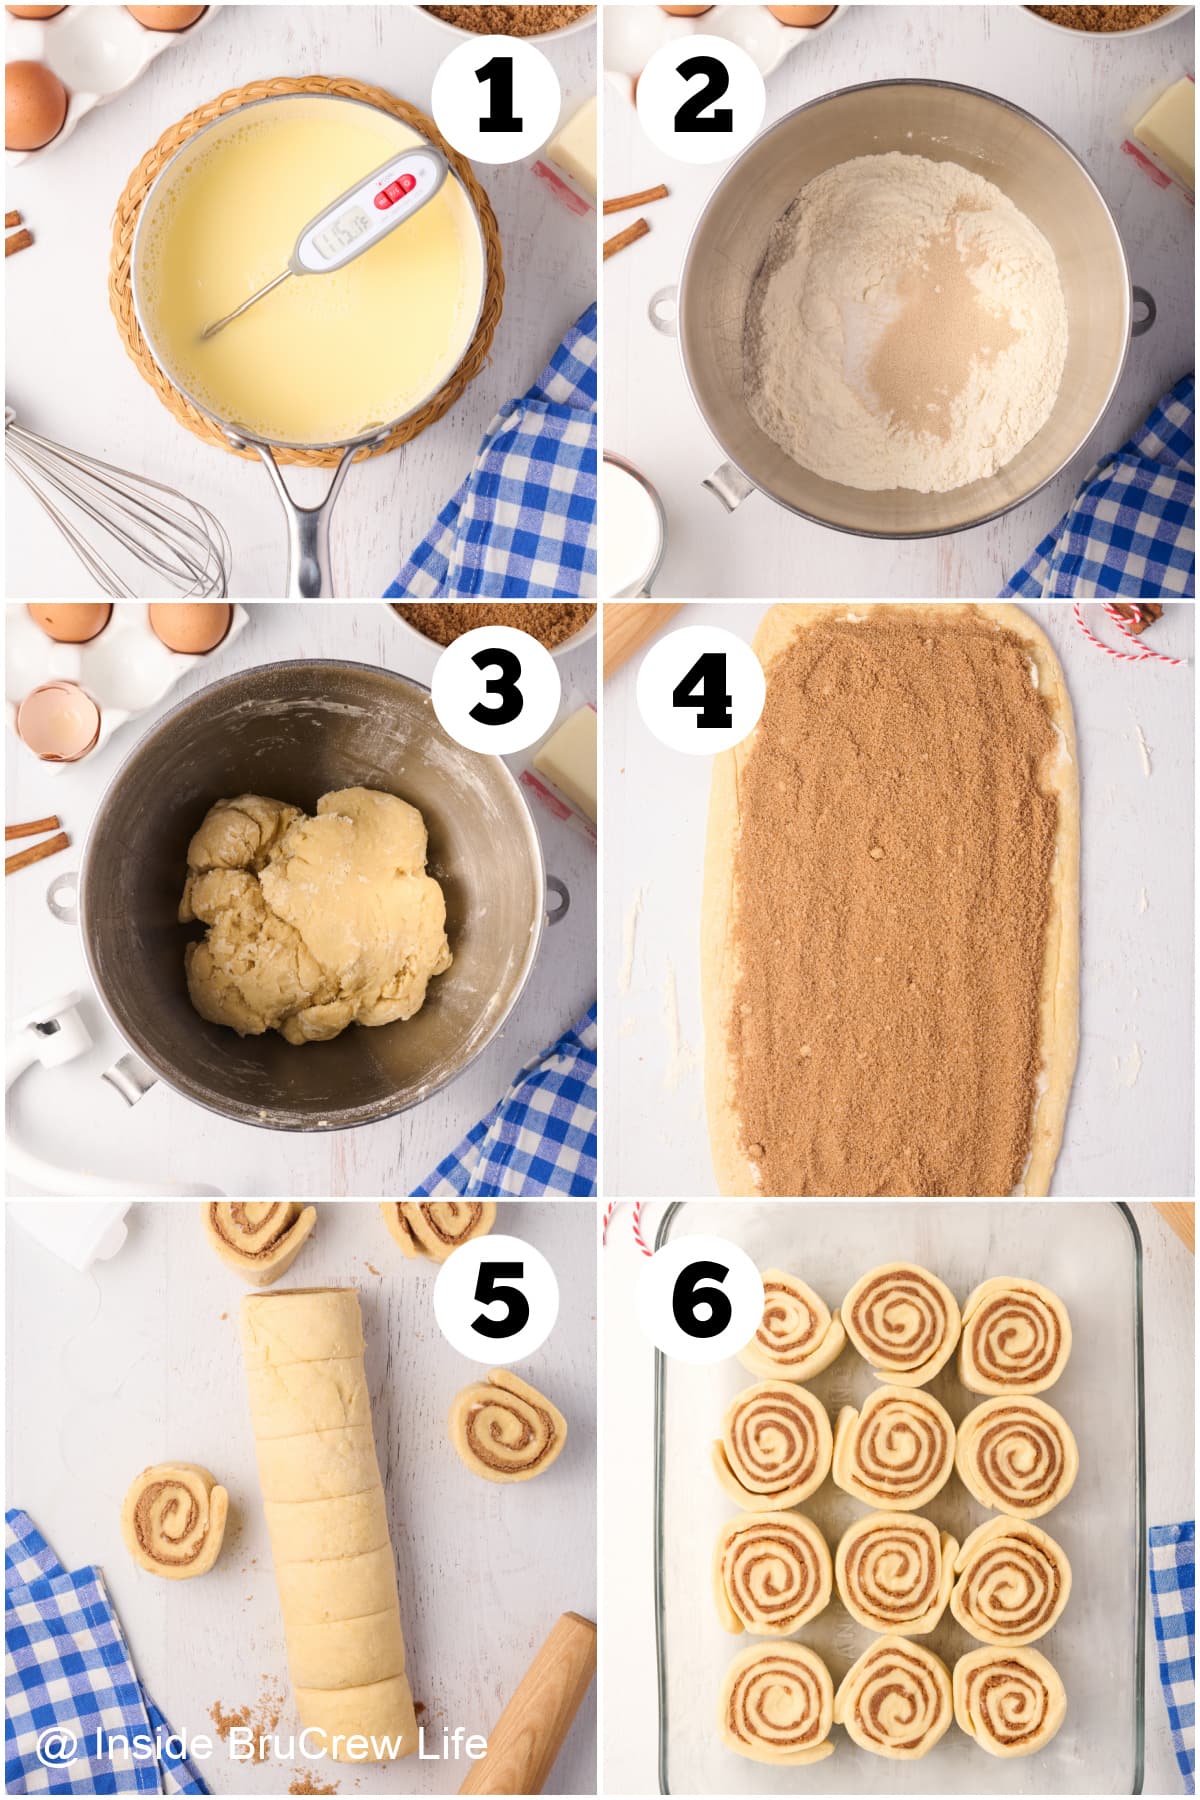 Six pictures collaged together showing the steps to make sweet rolls.